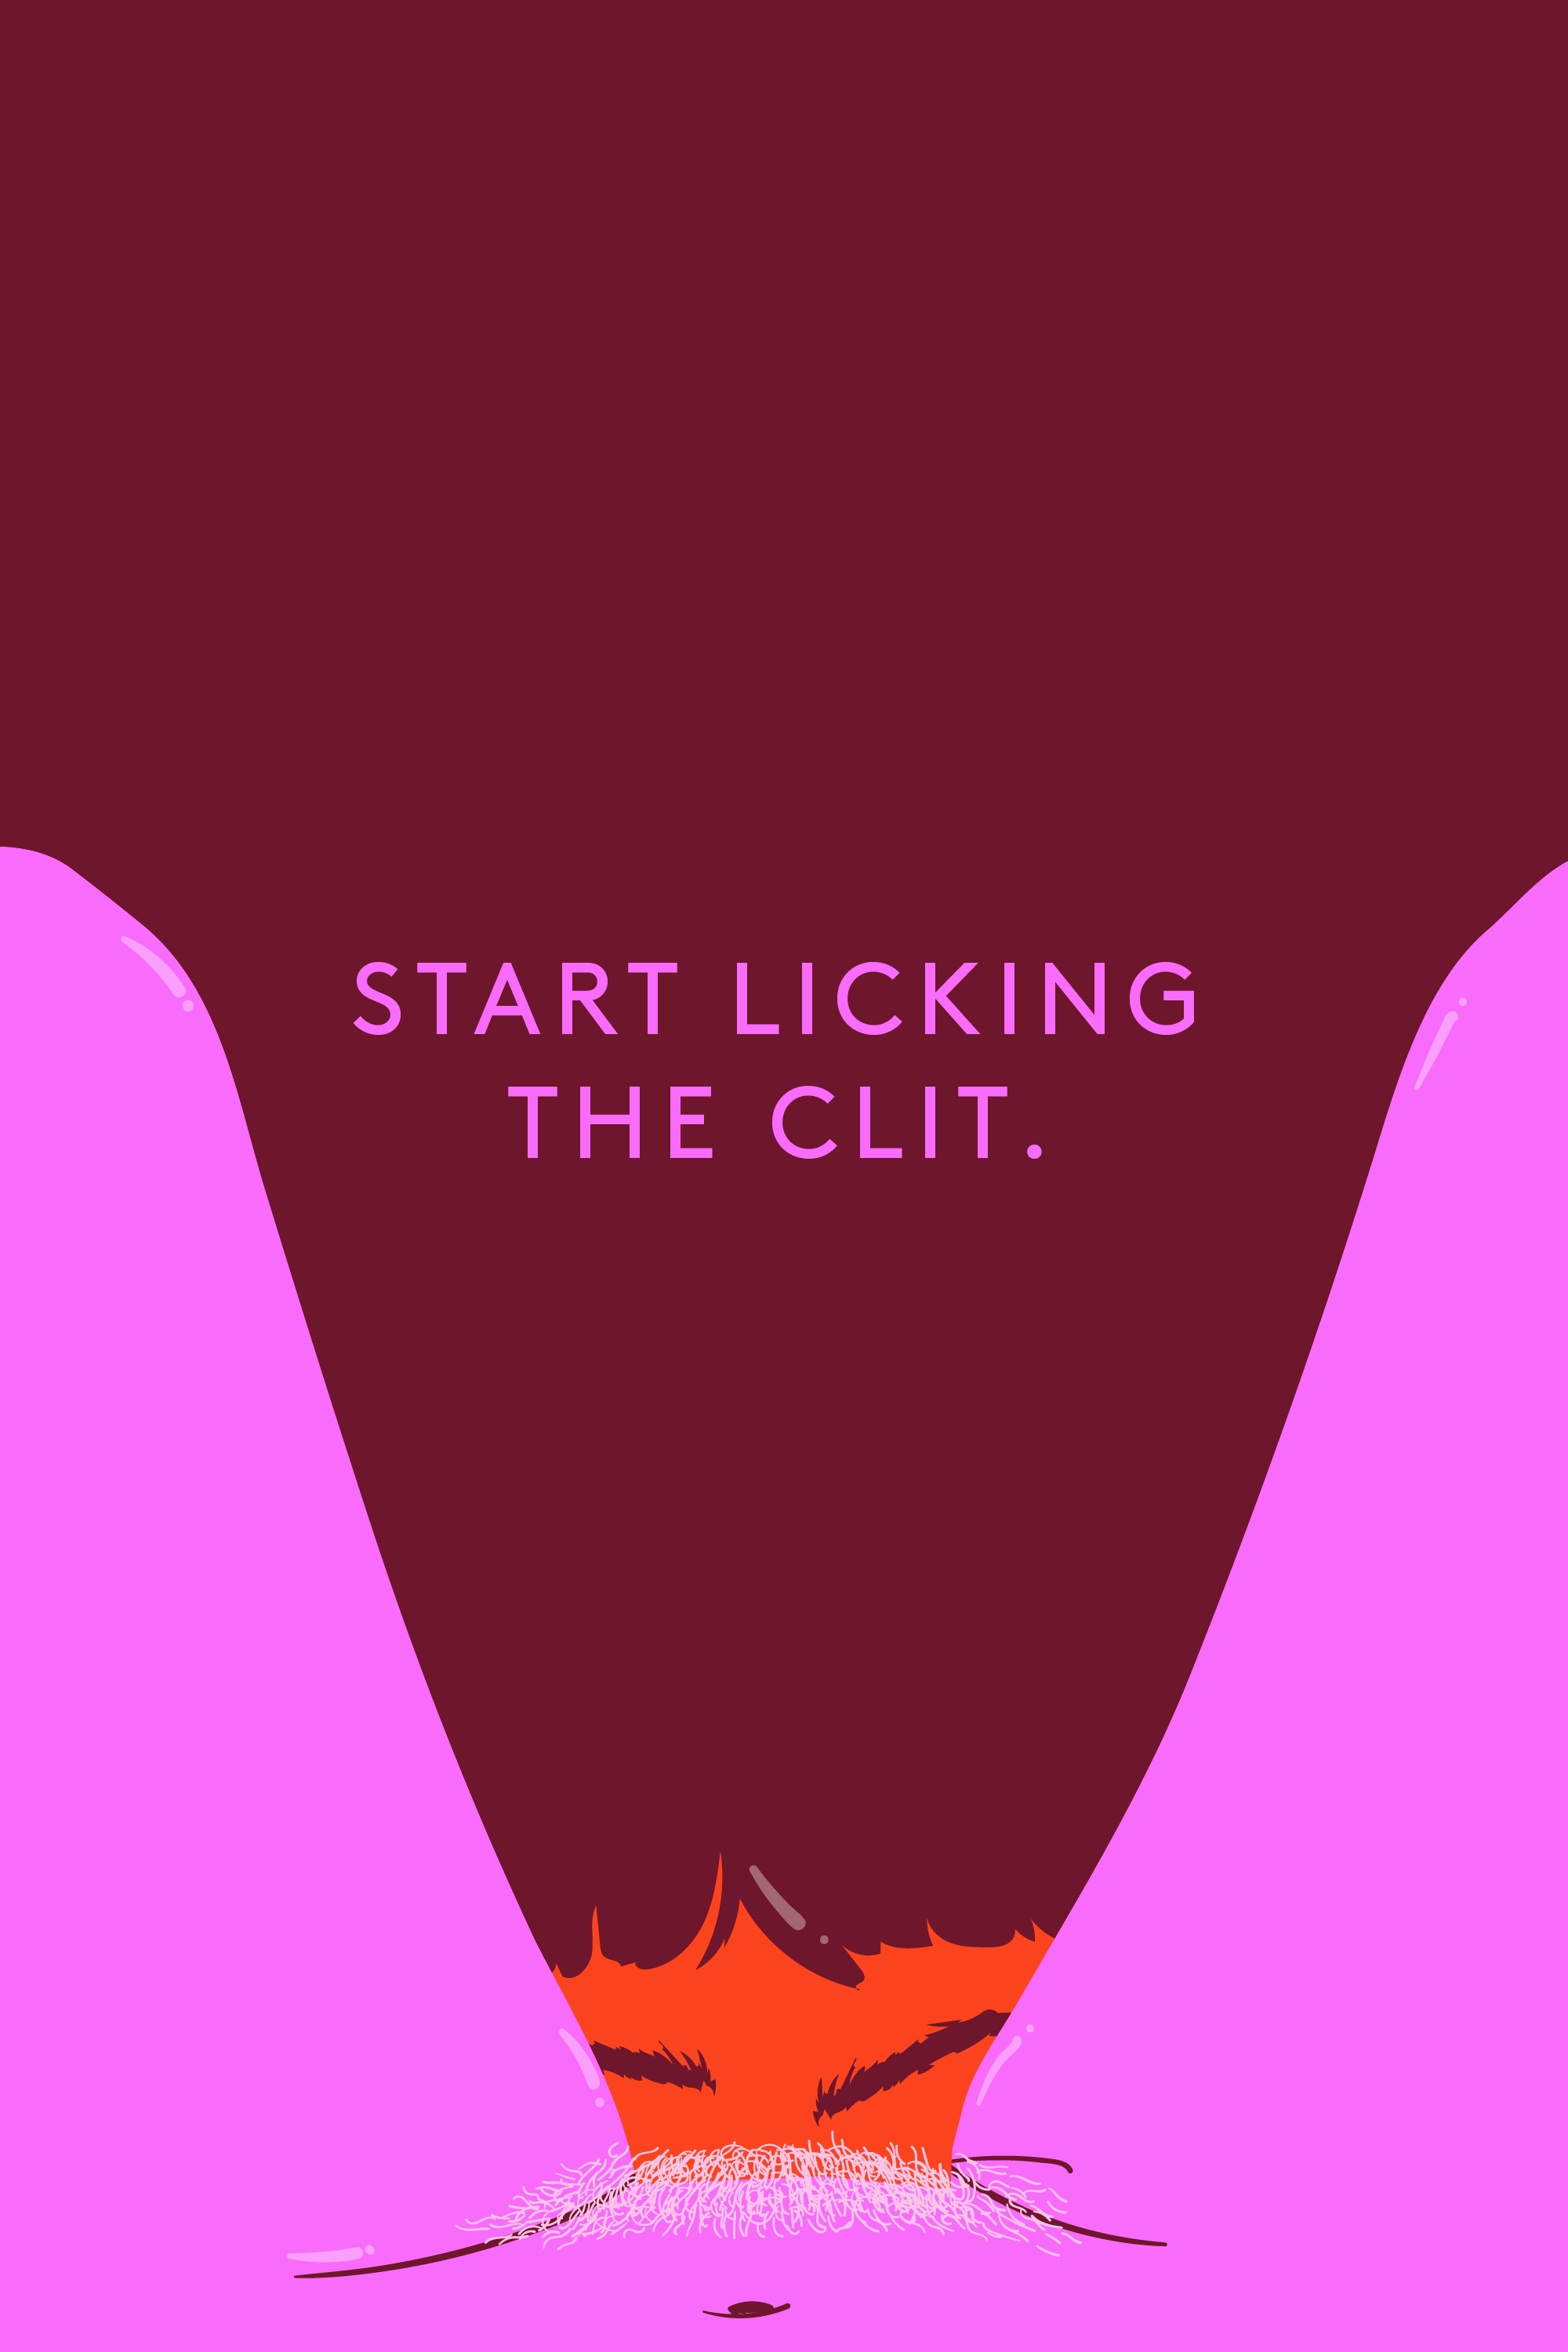 Martini reccomend Advice on licking a clit video